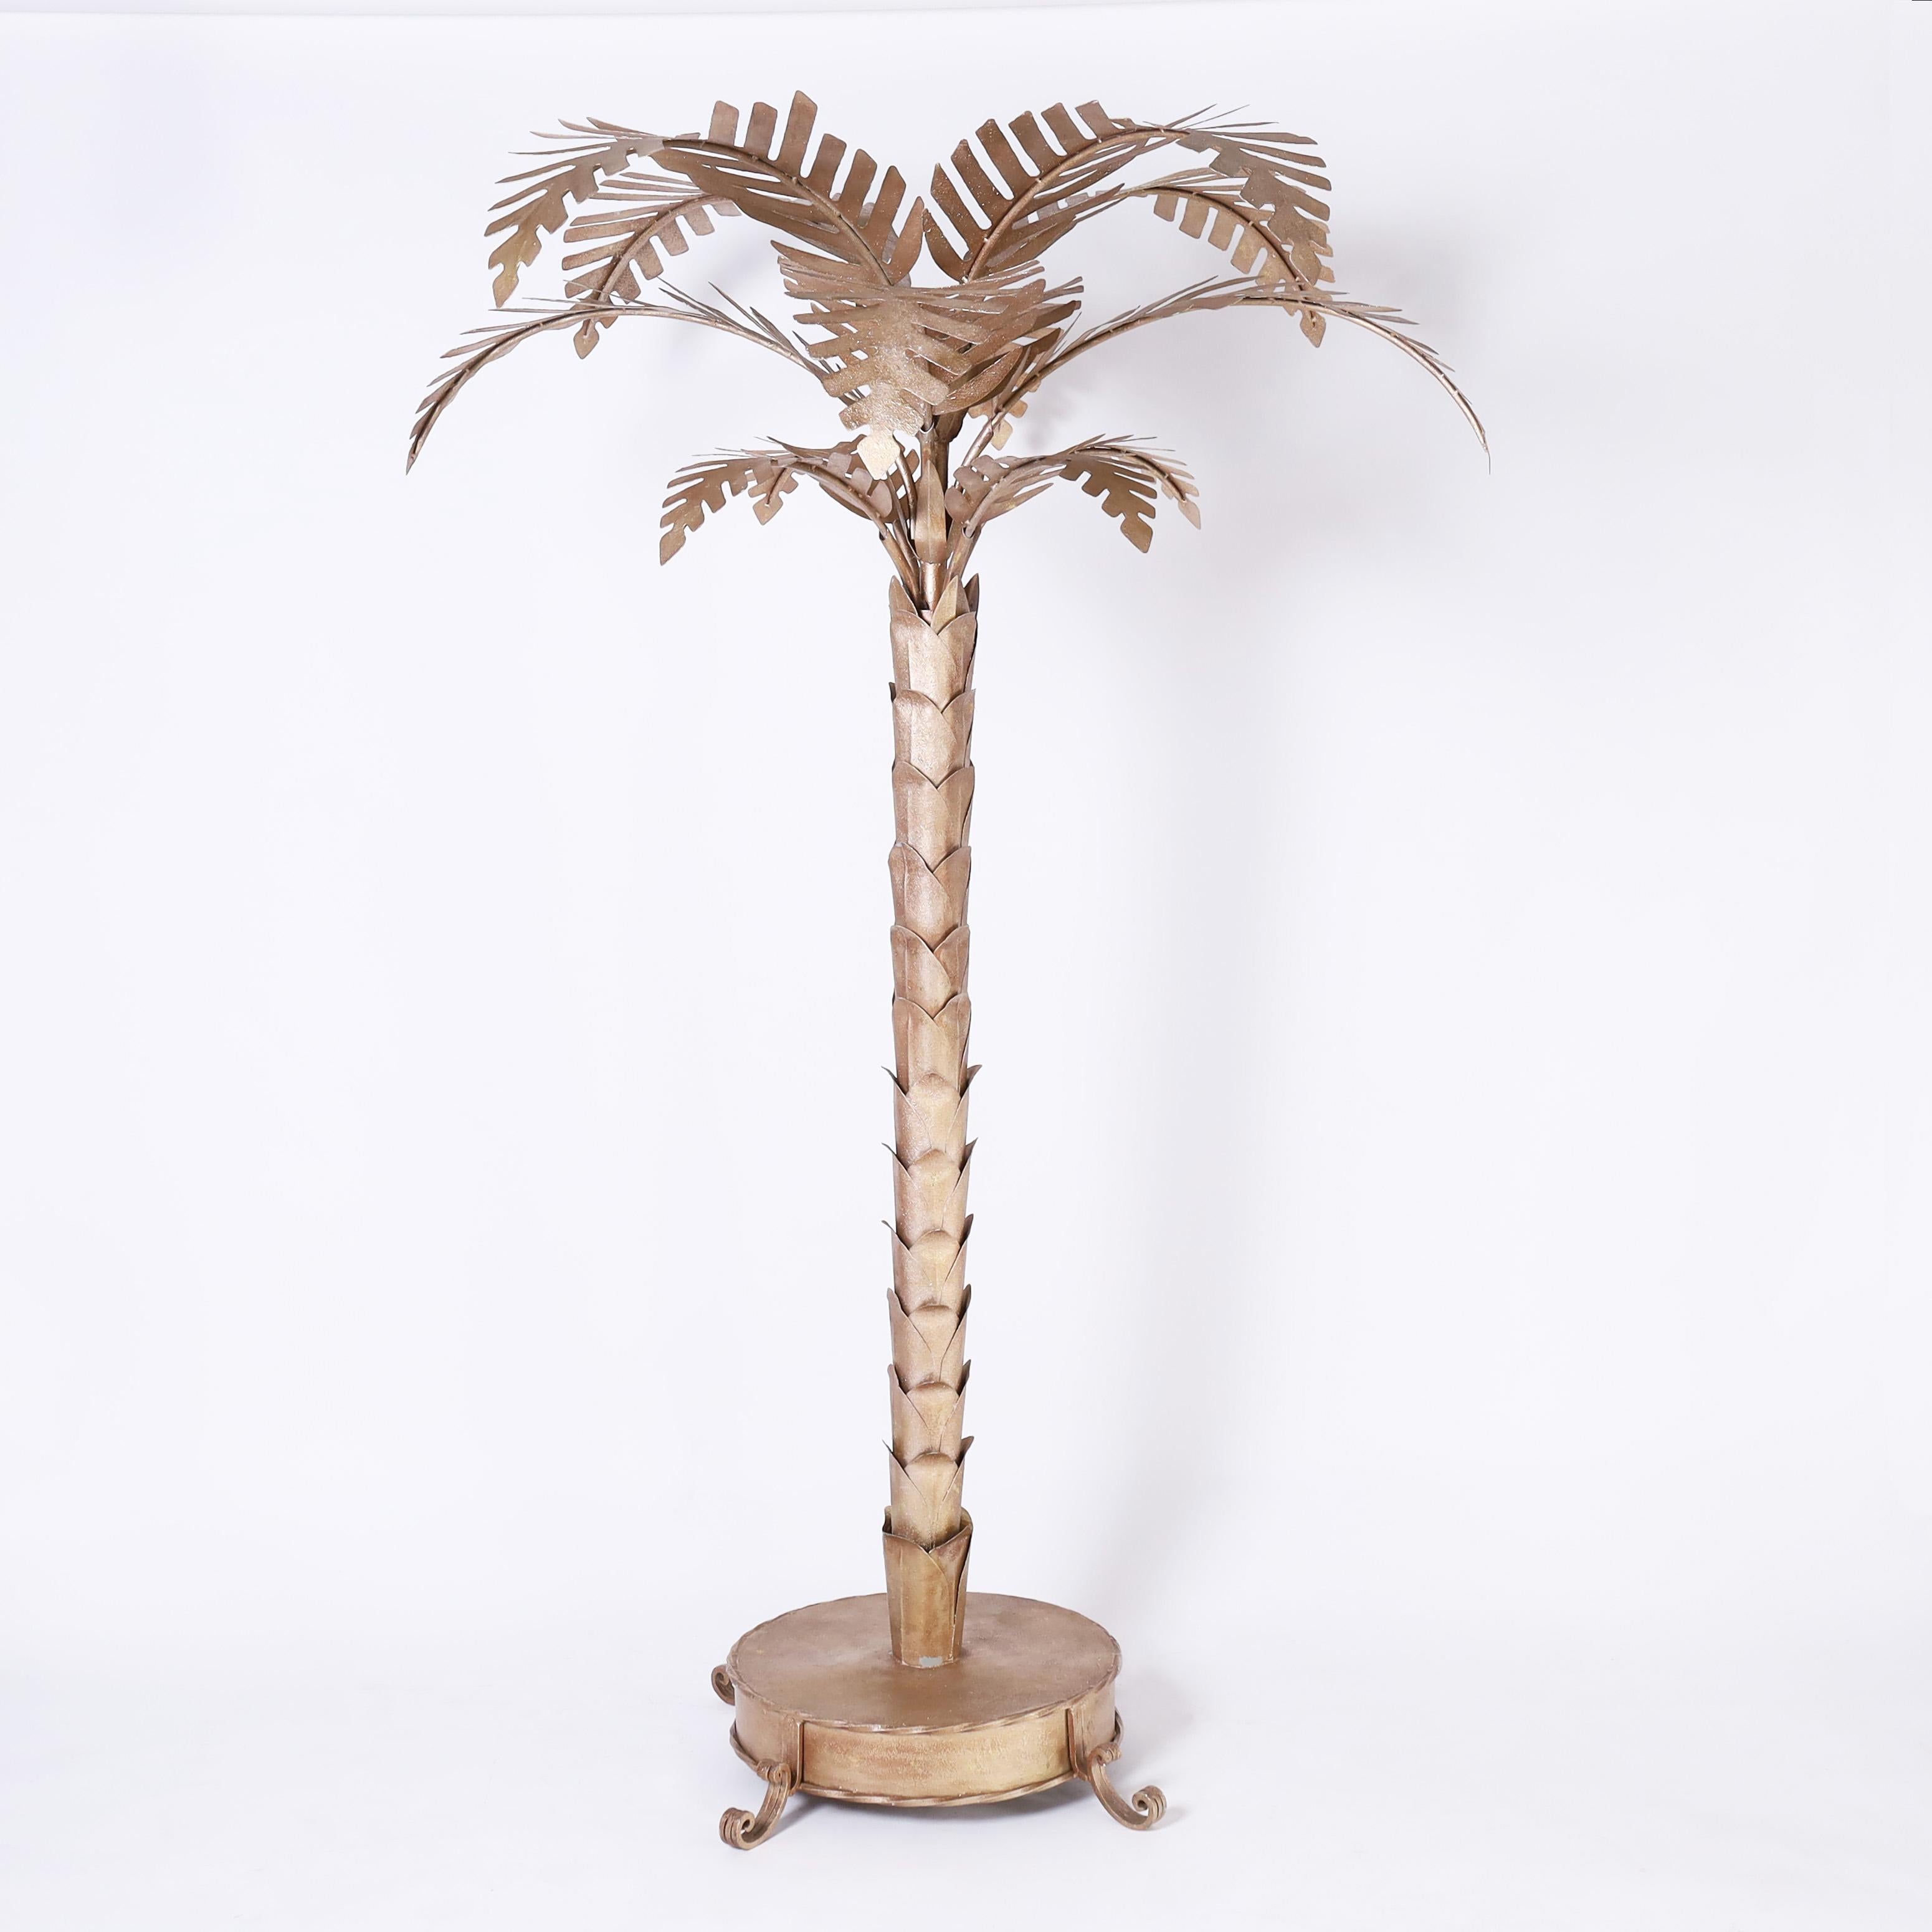 Stand out pair of mid century life size stylized palm tree sculptures hand crafted in metal with a chic gold tone finish. Disassembles for easy shipping.